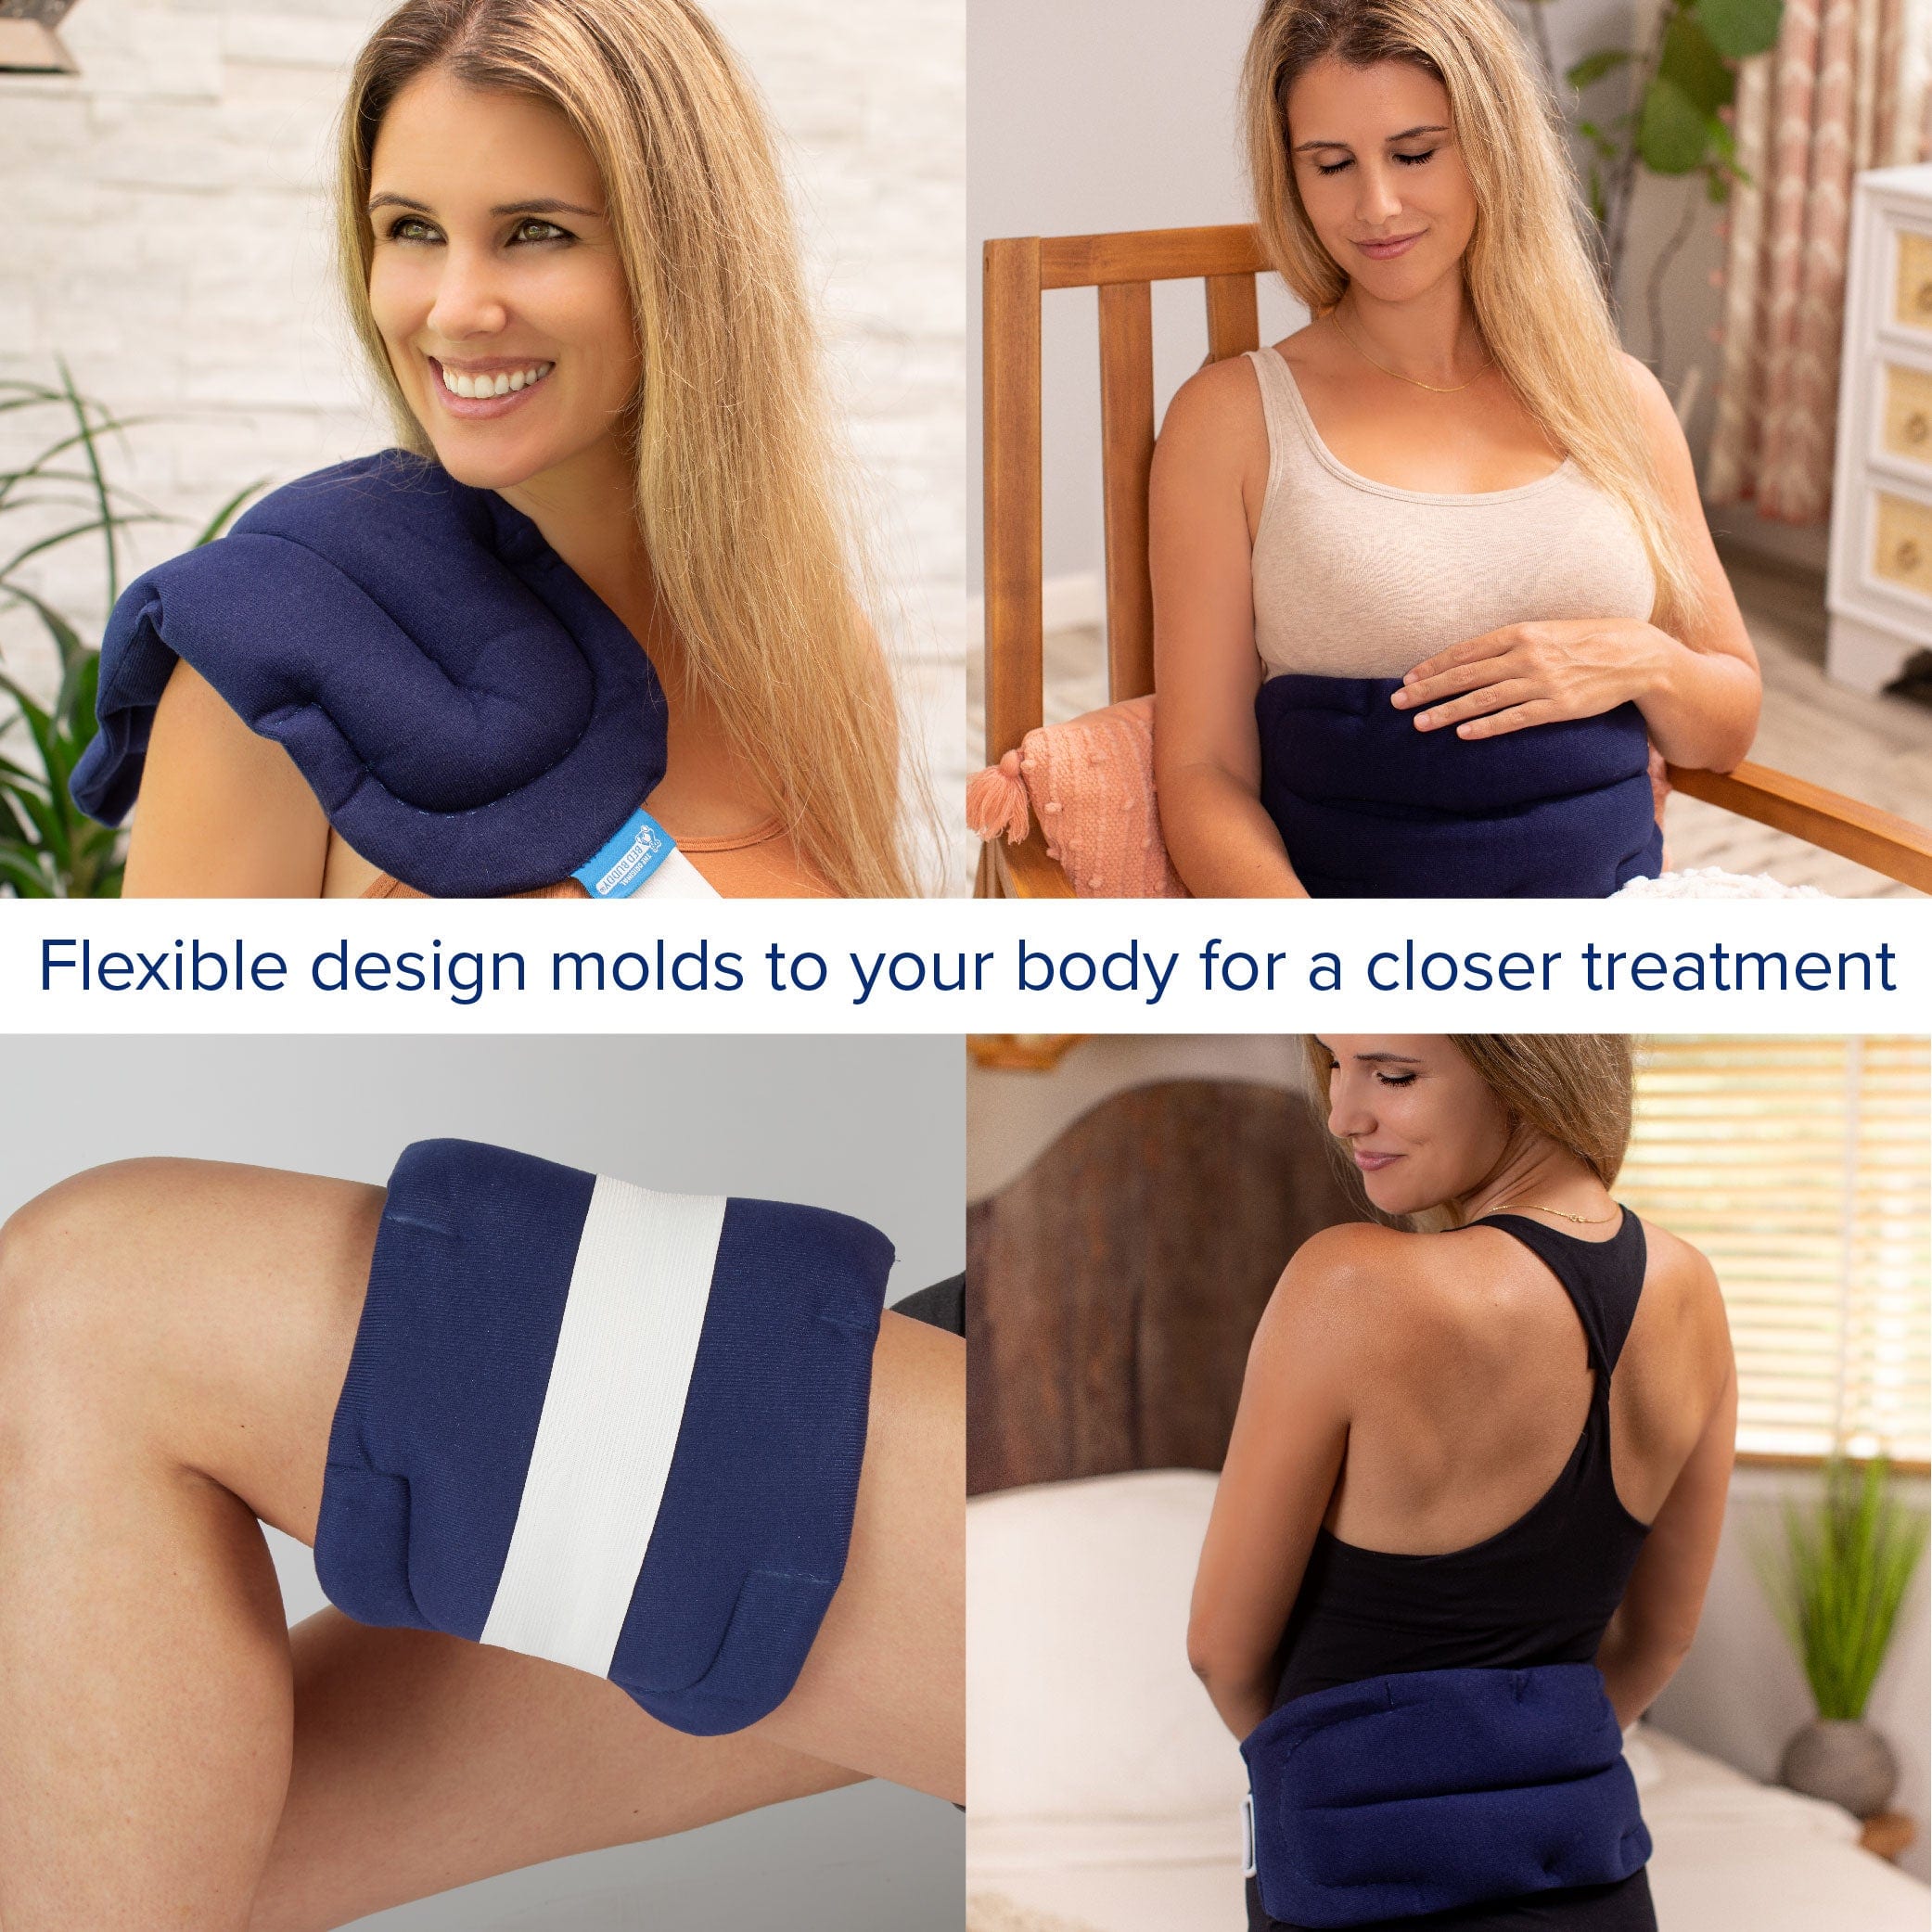 Bed Buddy Back Wrap - Flexible design molds to your body for a closer treatment